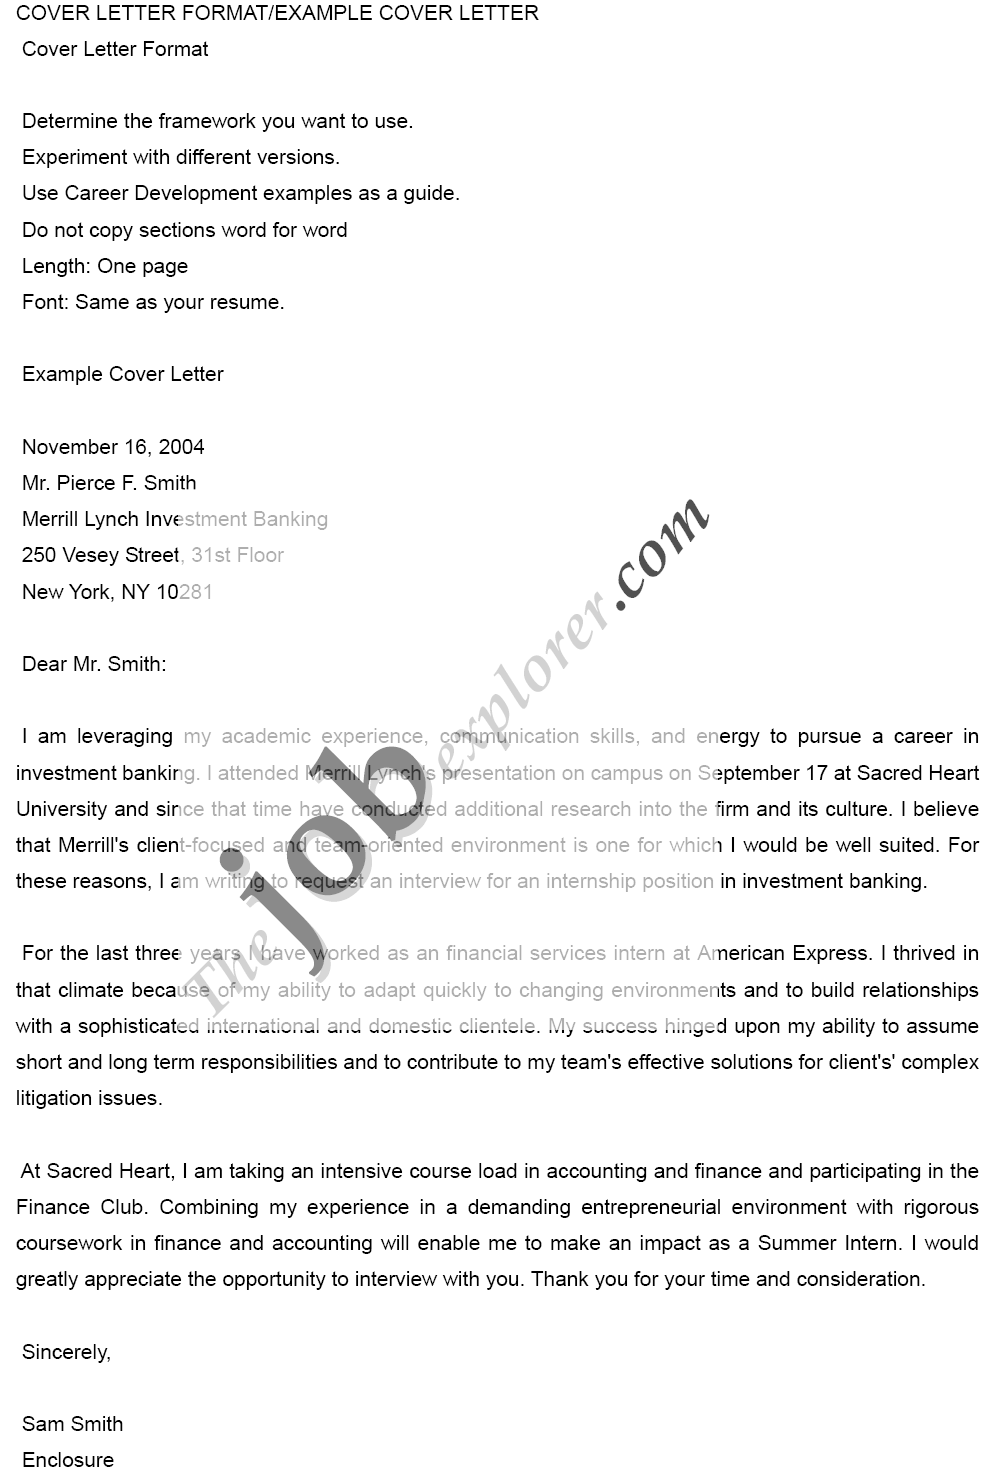 chef resume cover letter